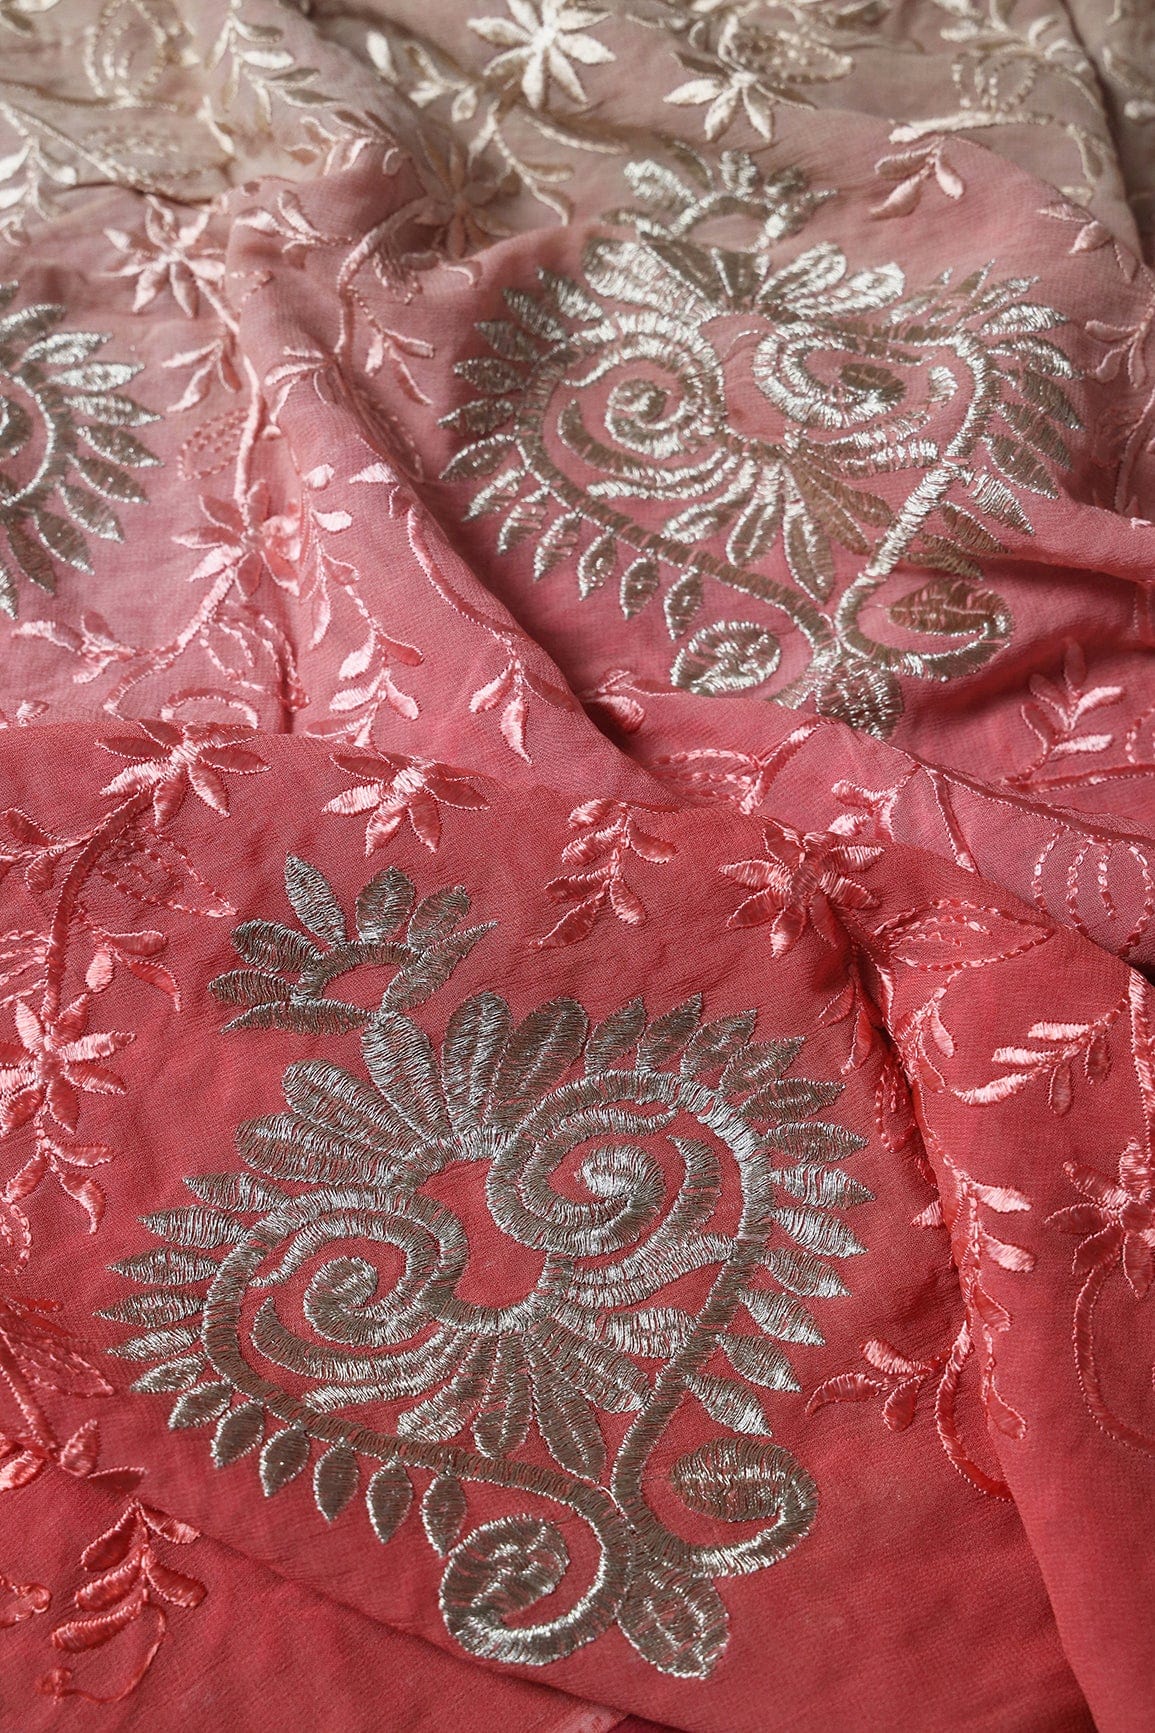 doeraa Embroidery Fabrics Copy of 1.75 Meter Cut Piece Of Multi Thread With Zari Floral Embroidery On Multi Color Viscose Georgette Fabric